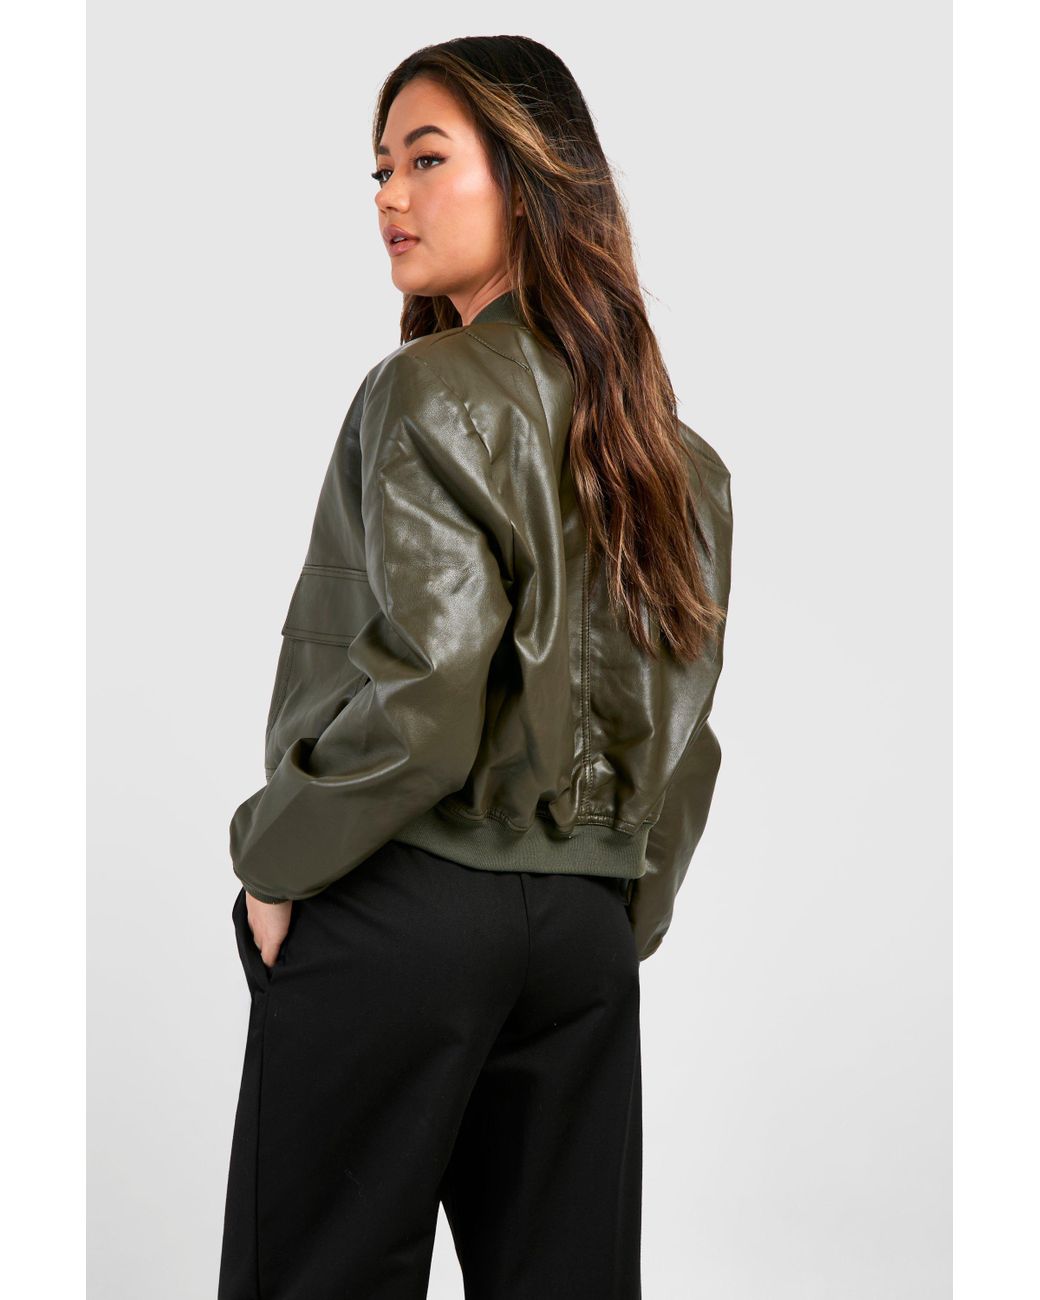 Boohoo Pocket Detail Faux Leather Bomber Jacket in Brown